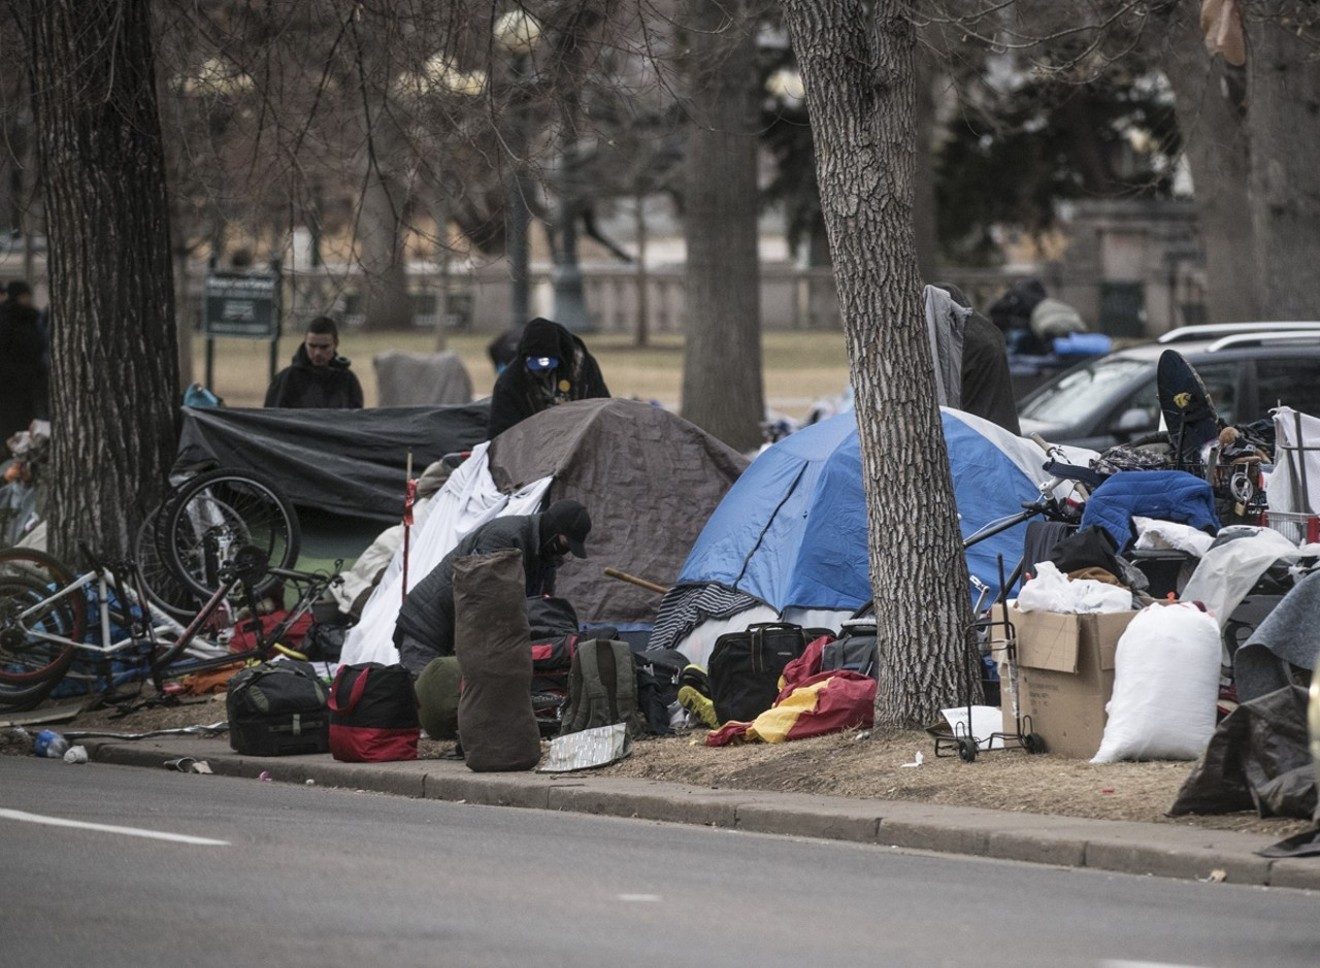 A new survey asked people experiencing homelessness what they want in housing.